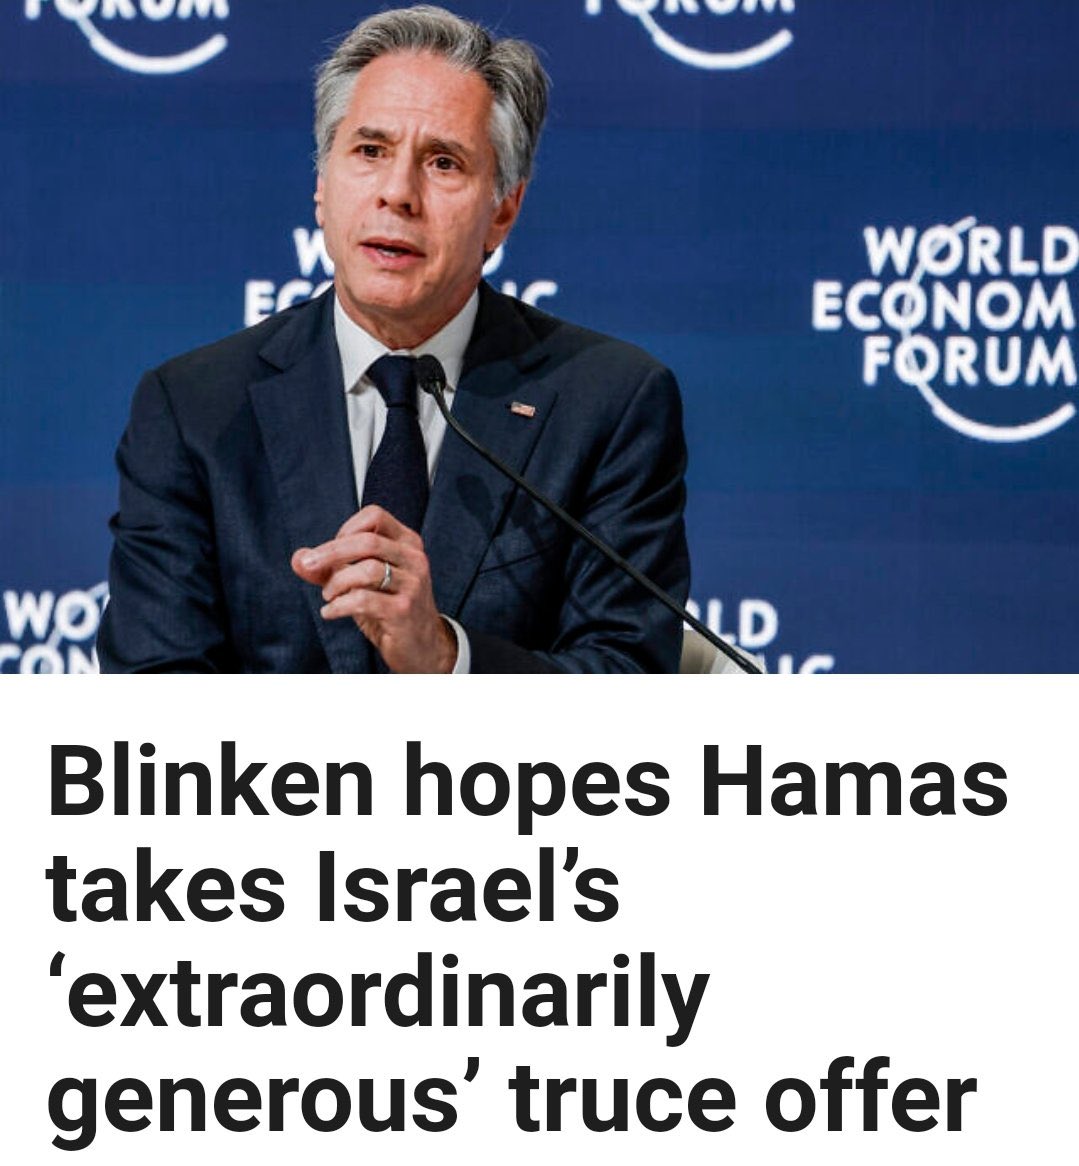 My guess and I hope I'm wrong: Hamas says no to the deal, and 2 hours later, the world goes back to blaming Israel for no ceasefire.